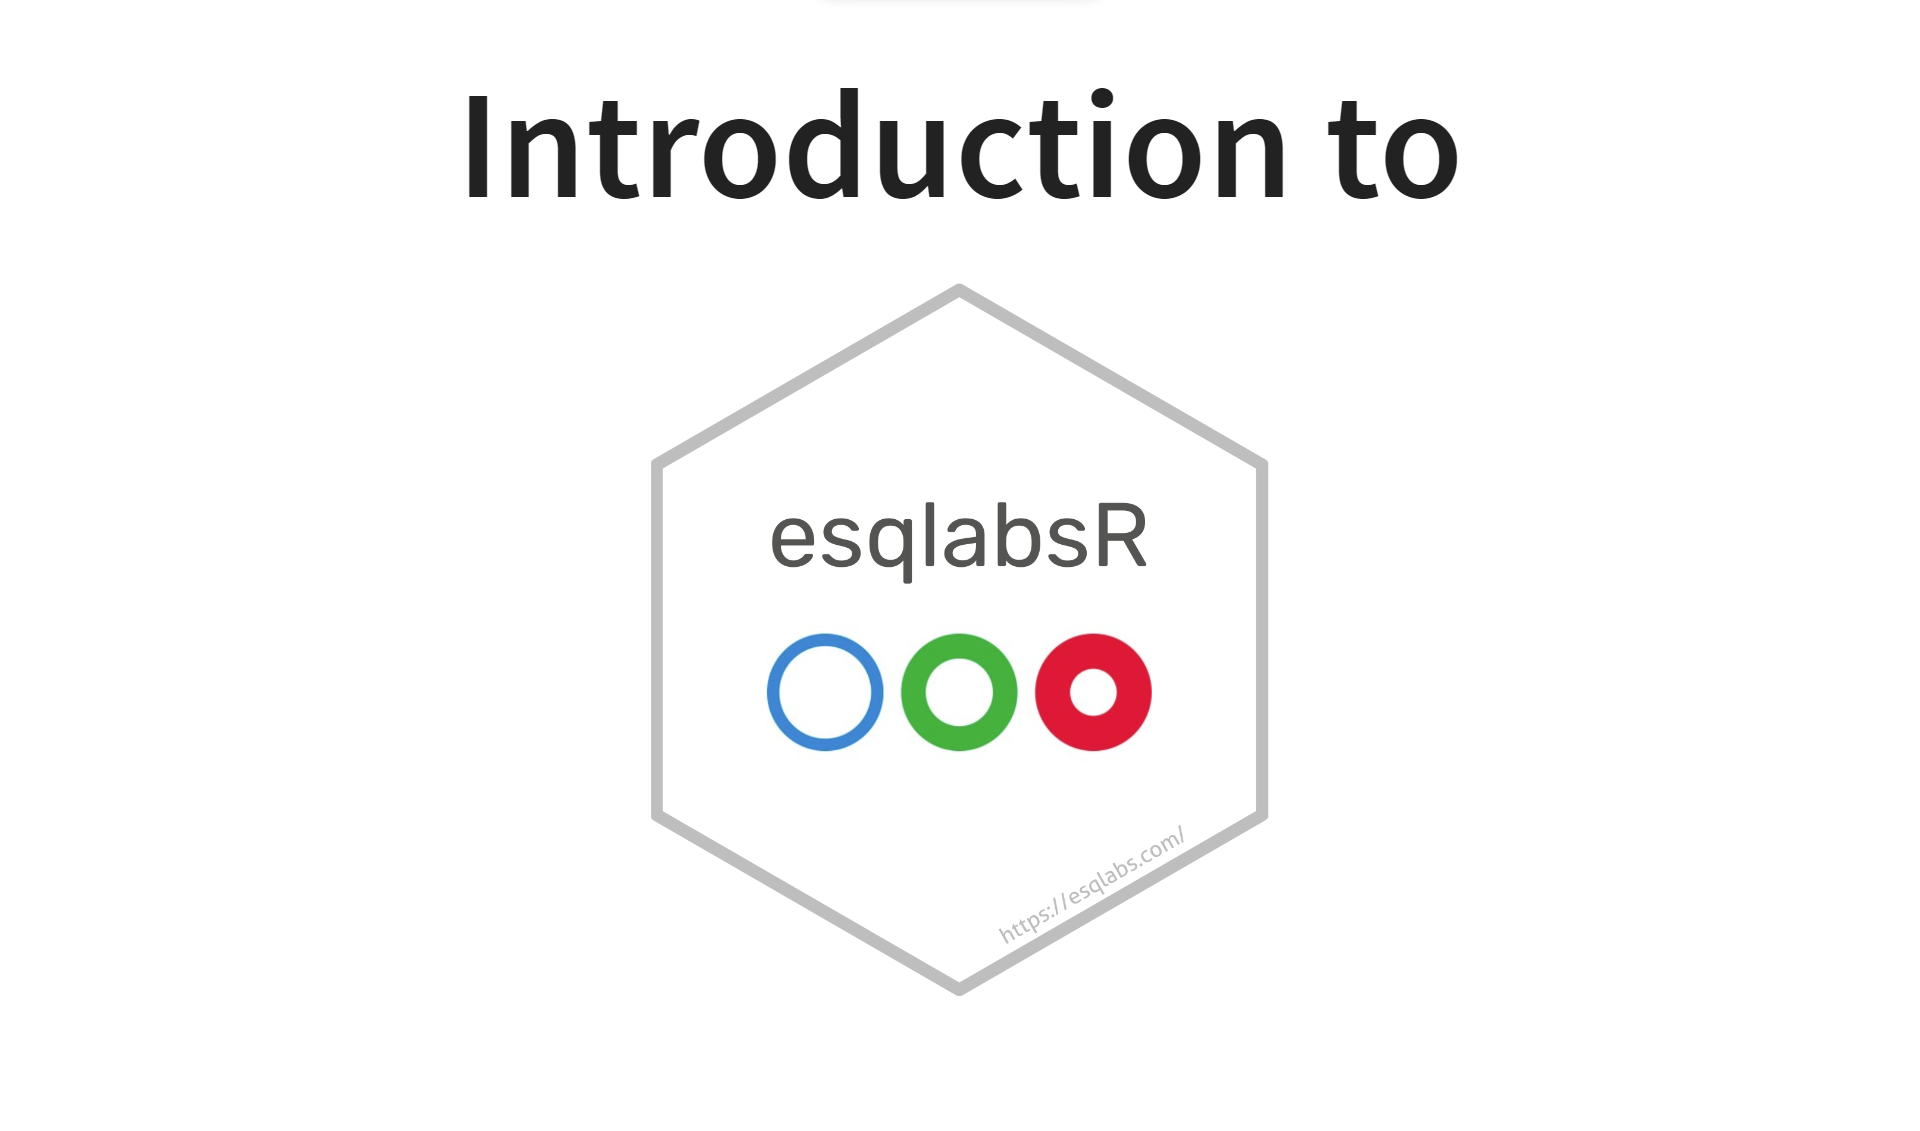 Introduction to esqlabsR